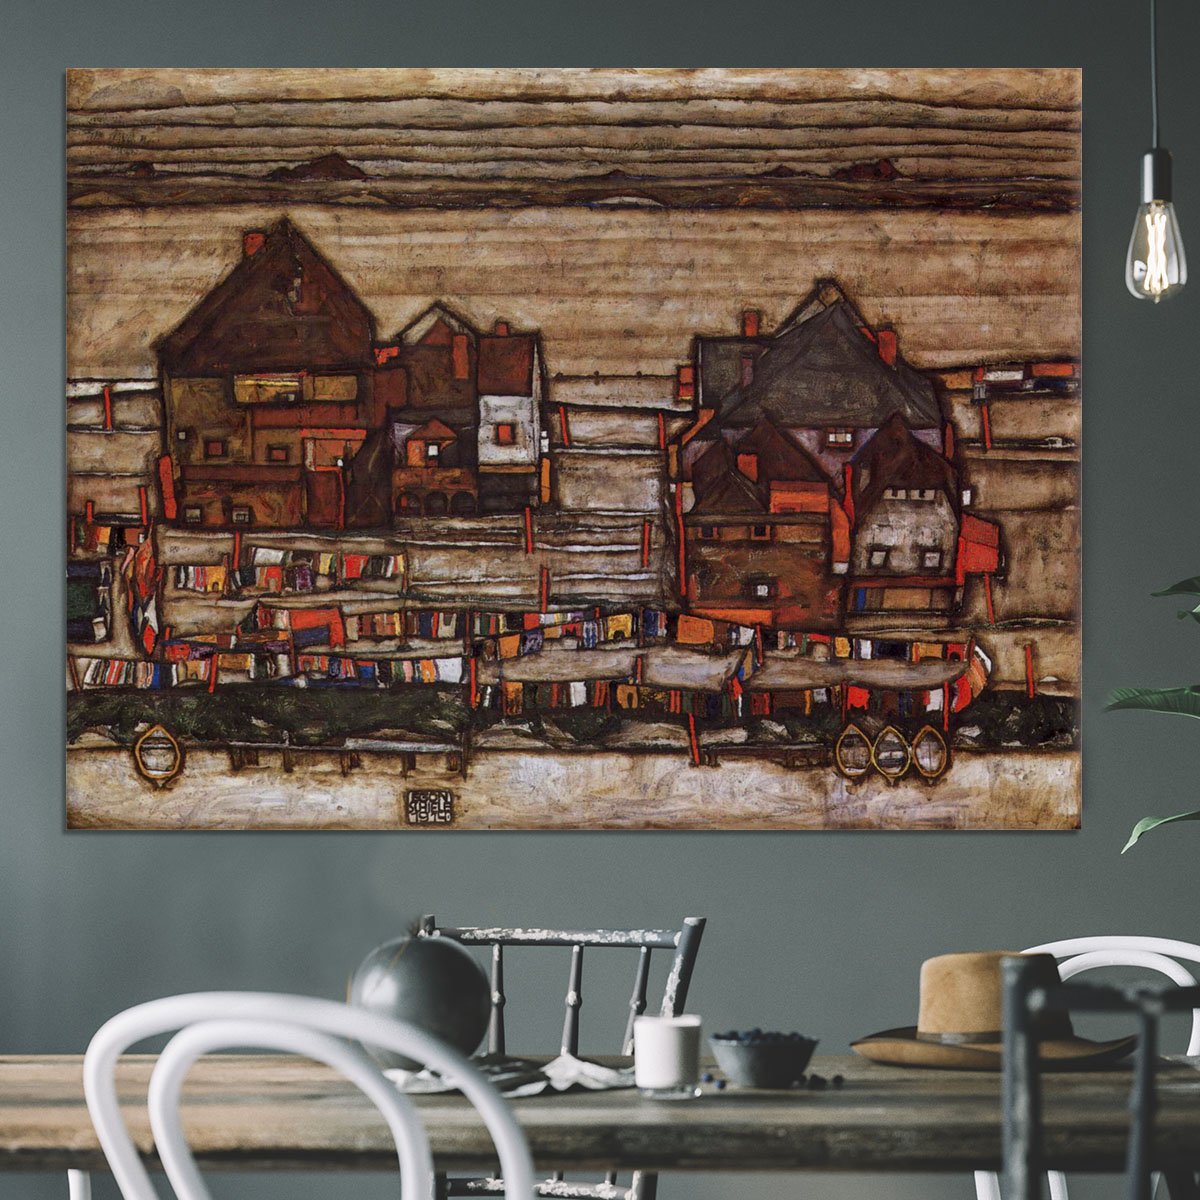 Houses with laundry lines and suburban by Egon Schiele Canvas Print or Poster